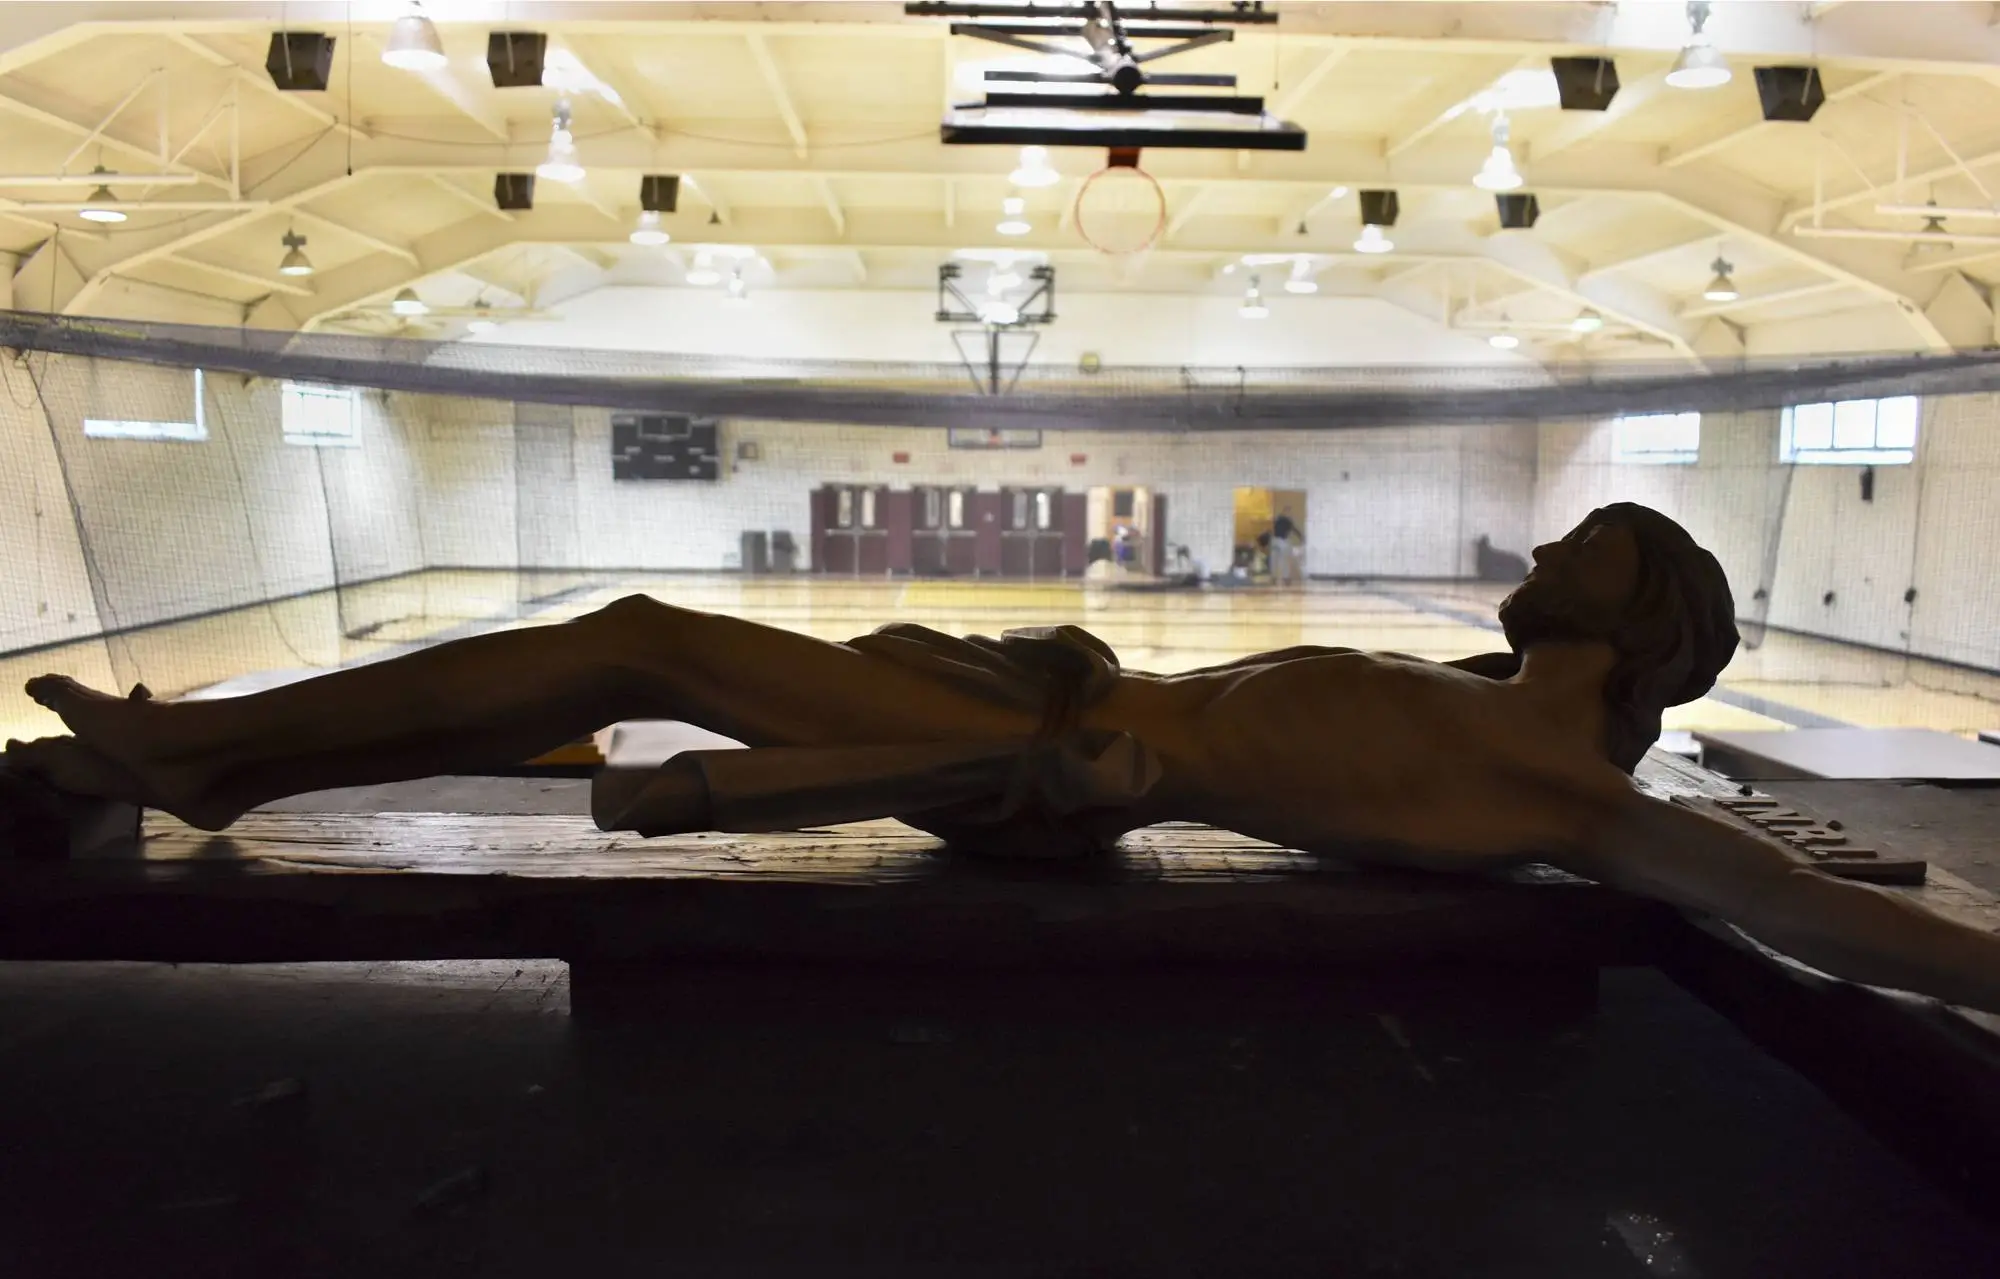 Kelsie Winship ’26 Untitled 2022 Crucifix resting on theater stage in high school gymnasium.